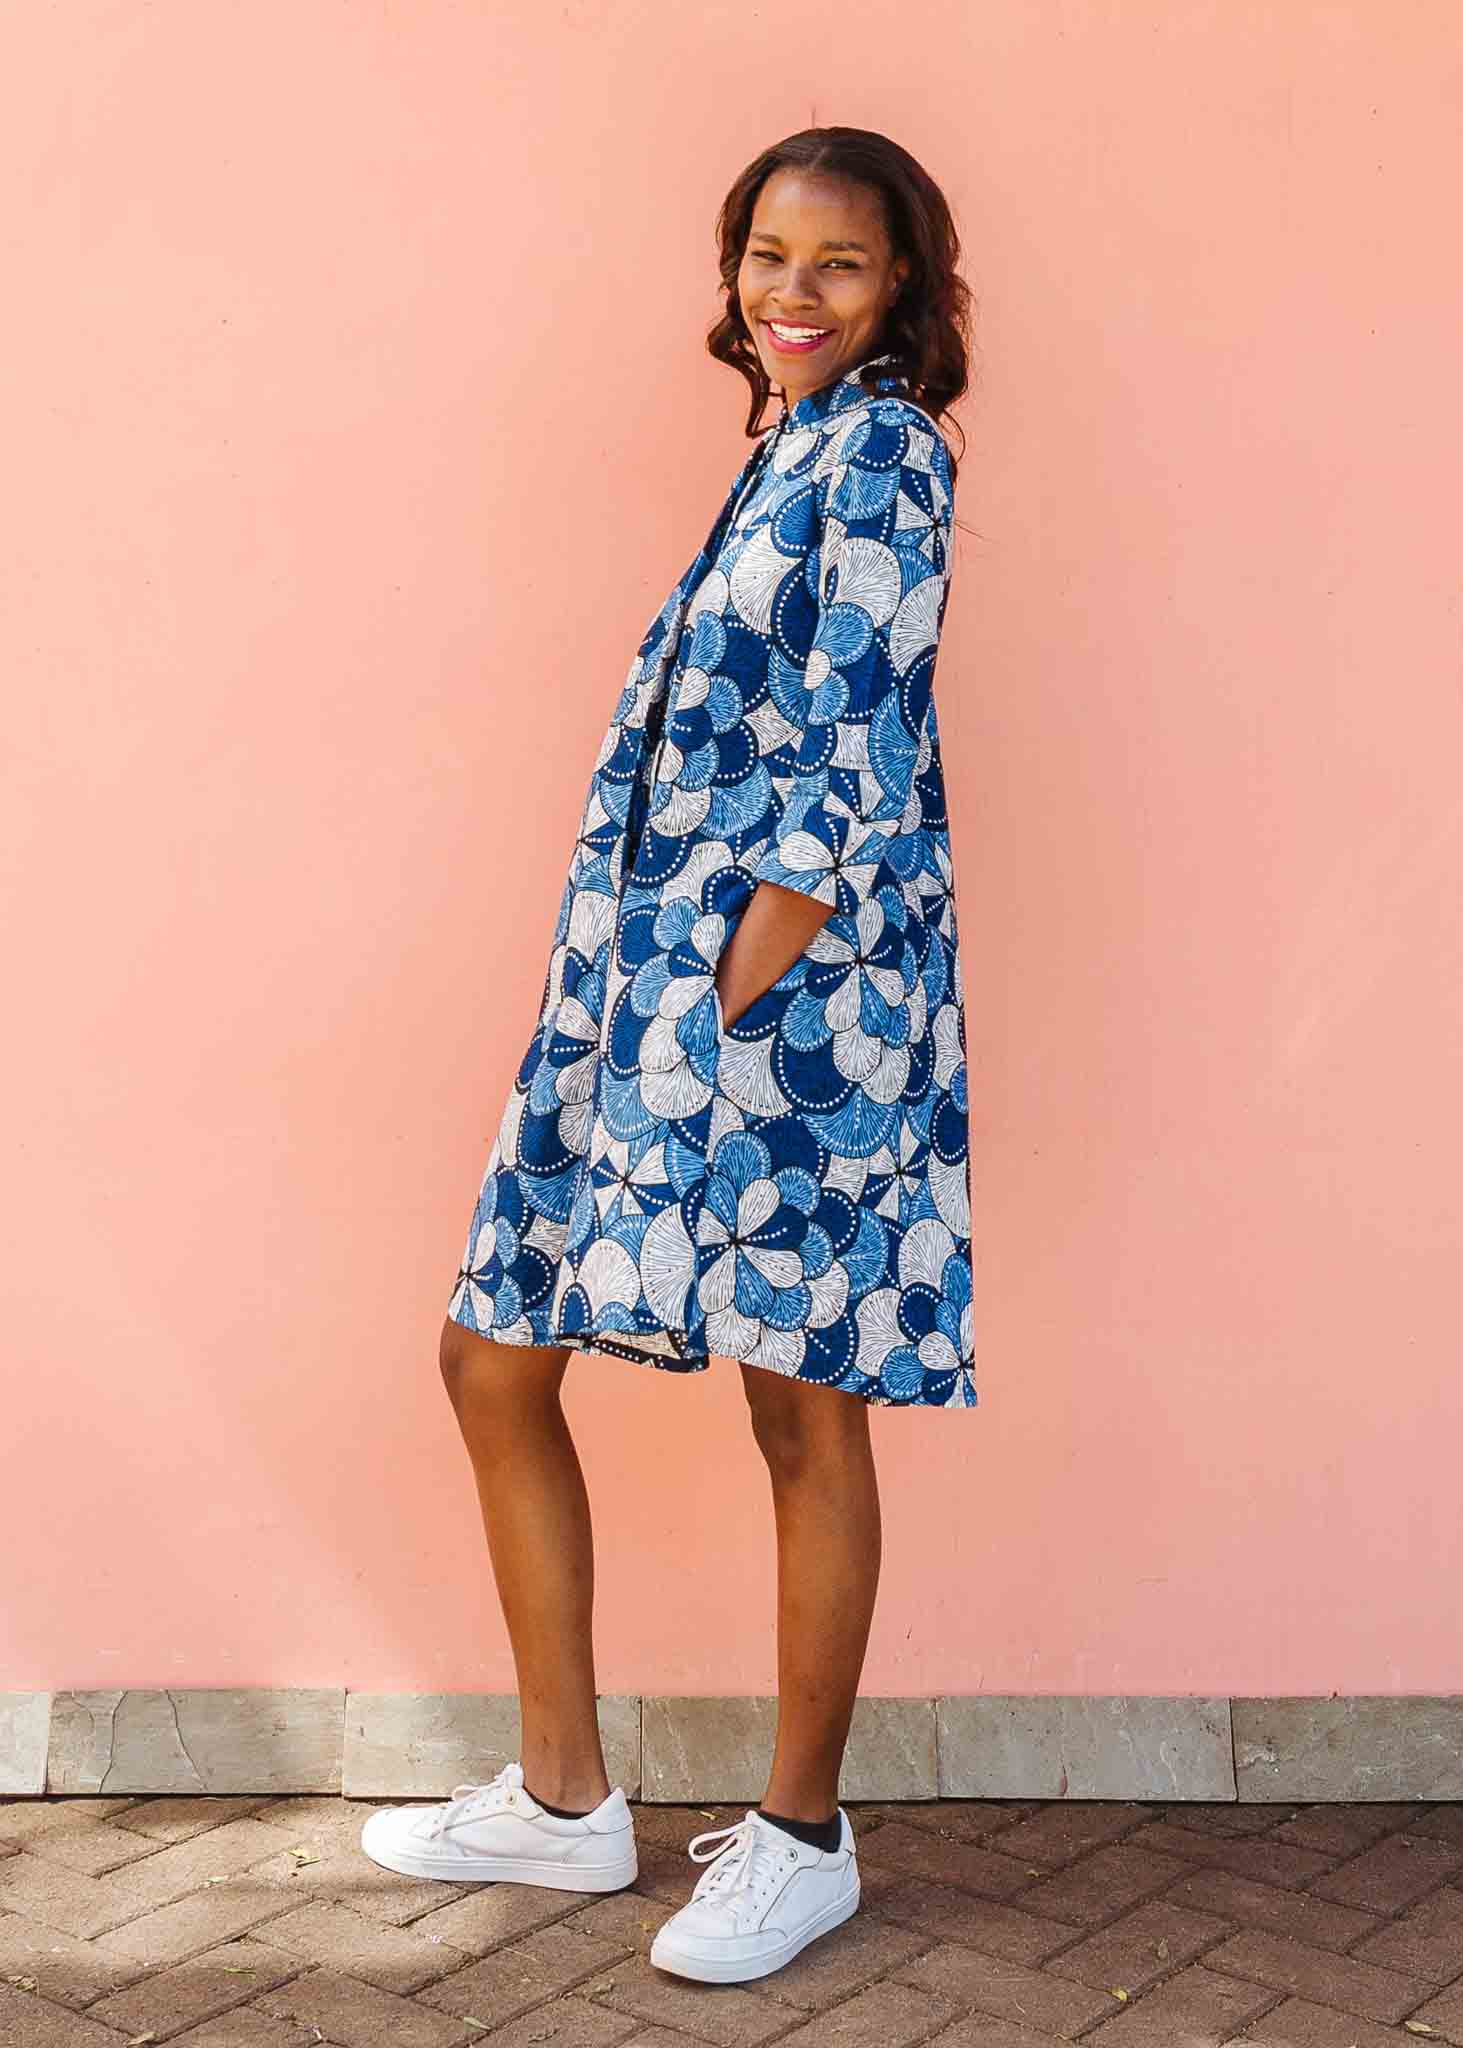 Model wearing blue and white floral print dress.